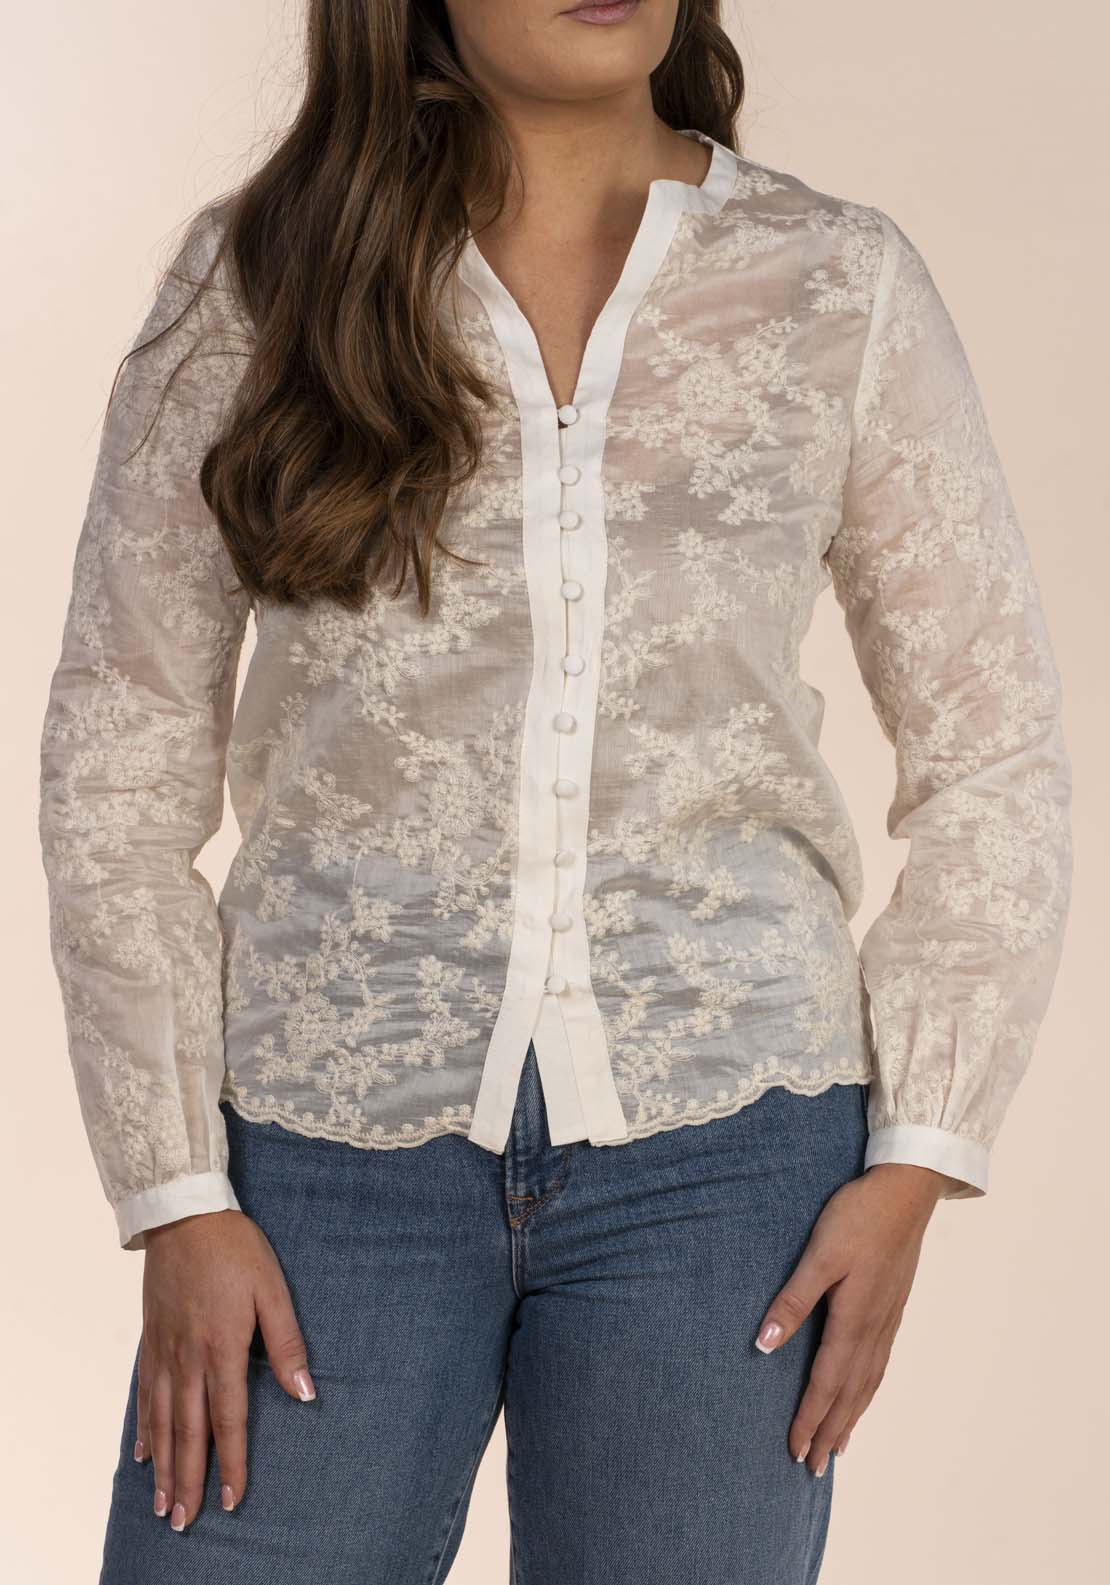 Naoise Anglaise Lace Blouse - White 2 Shaws Department Stores